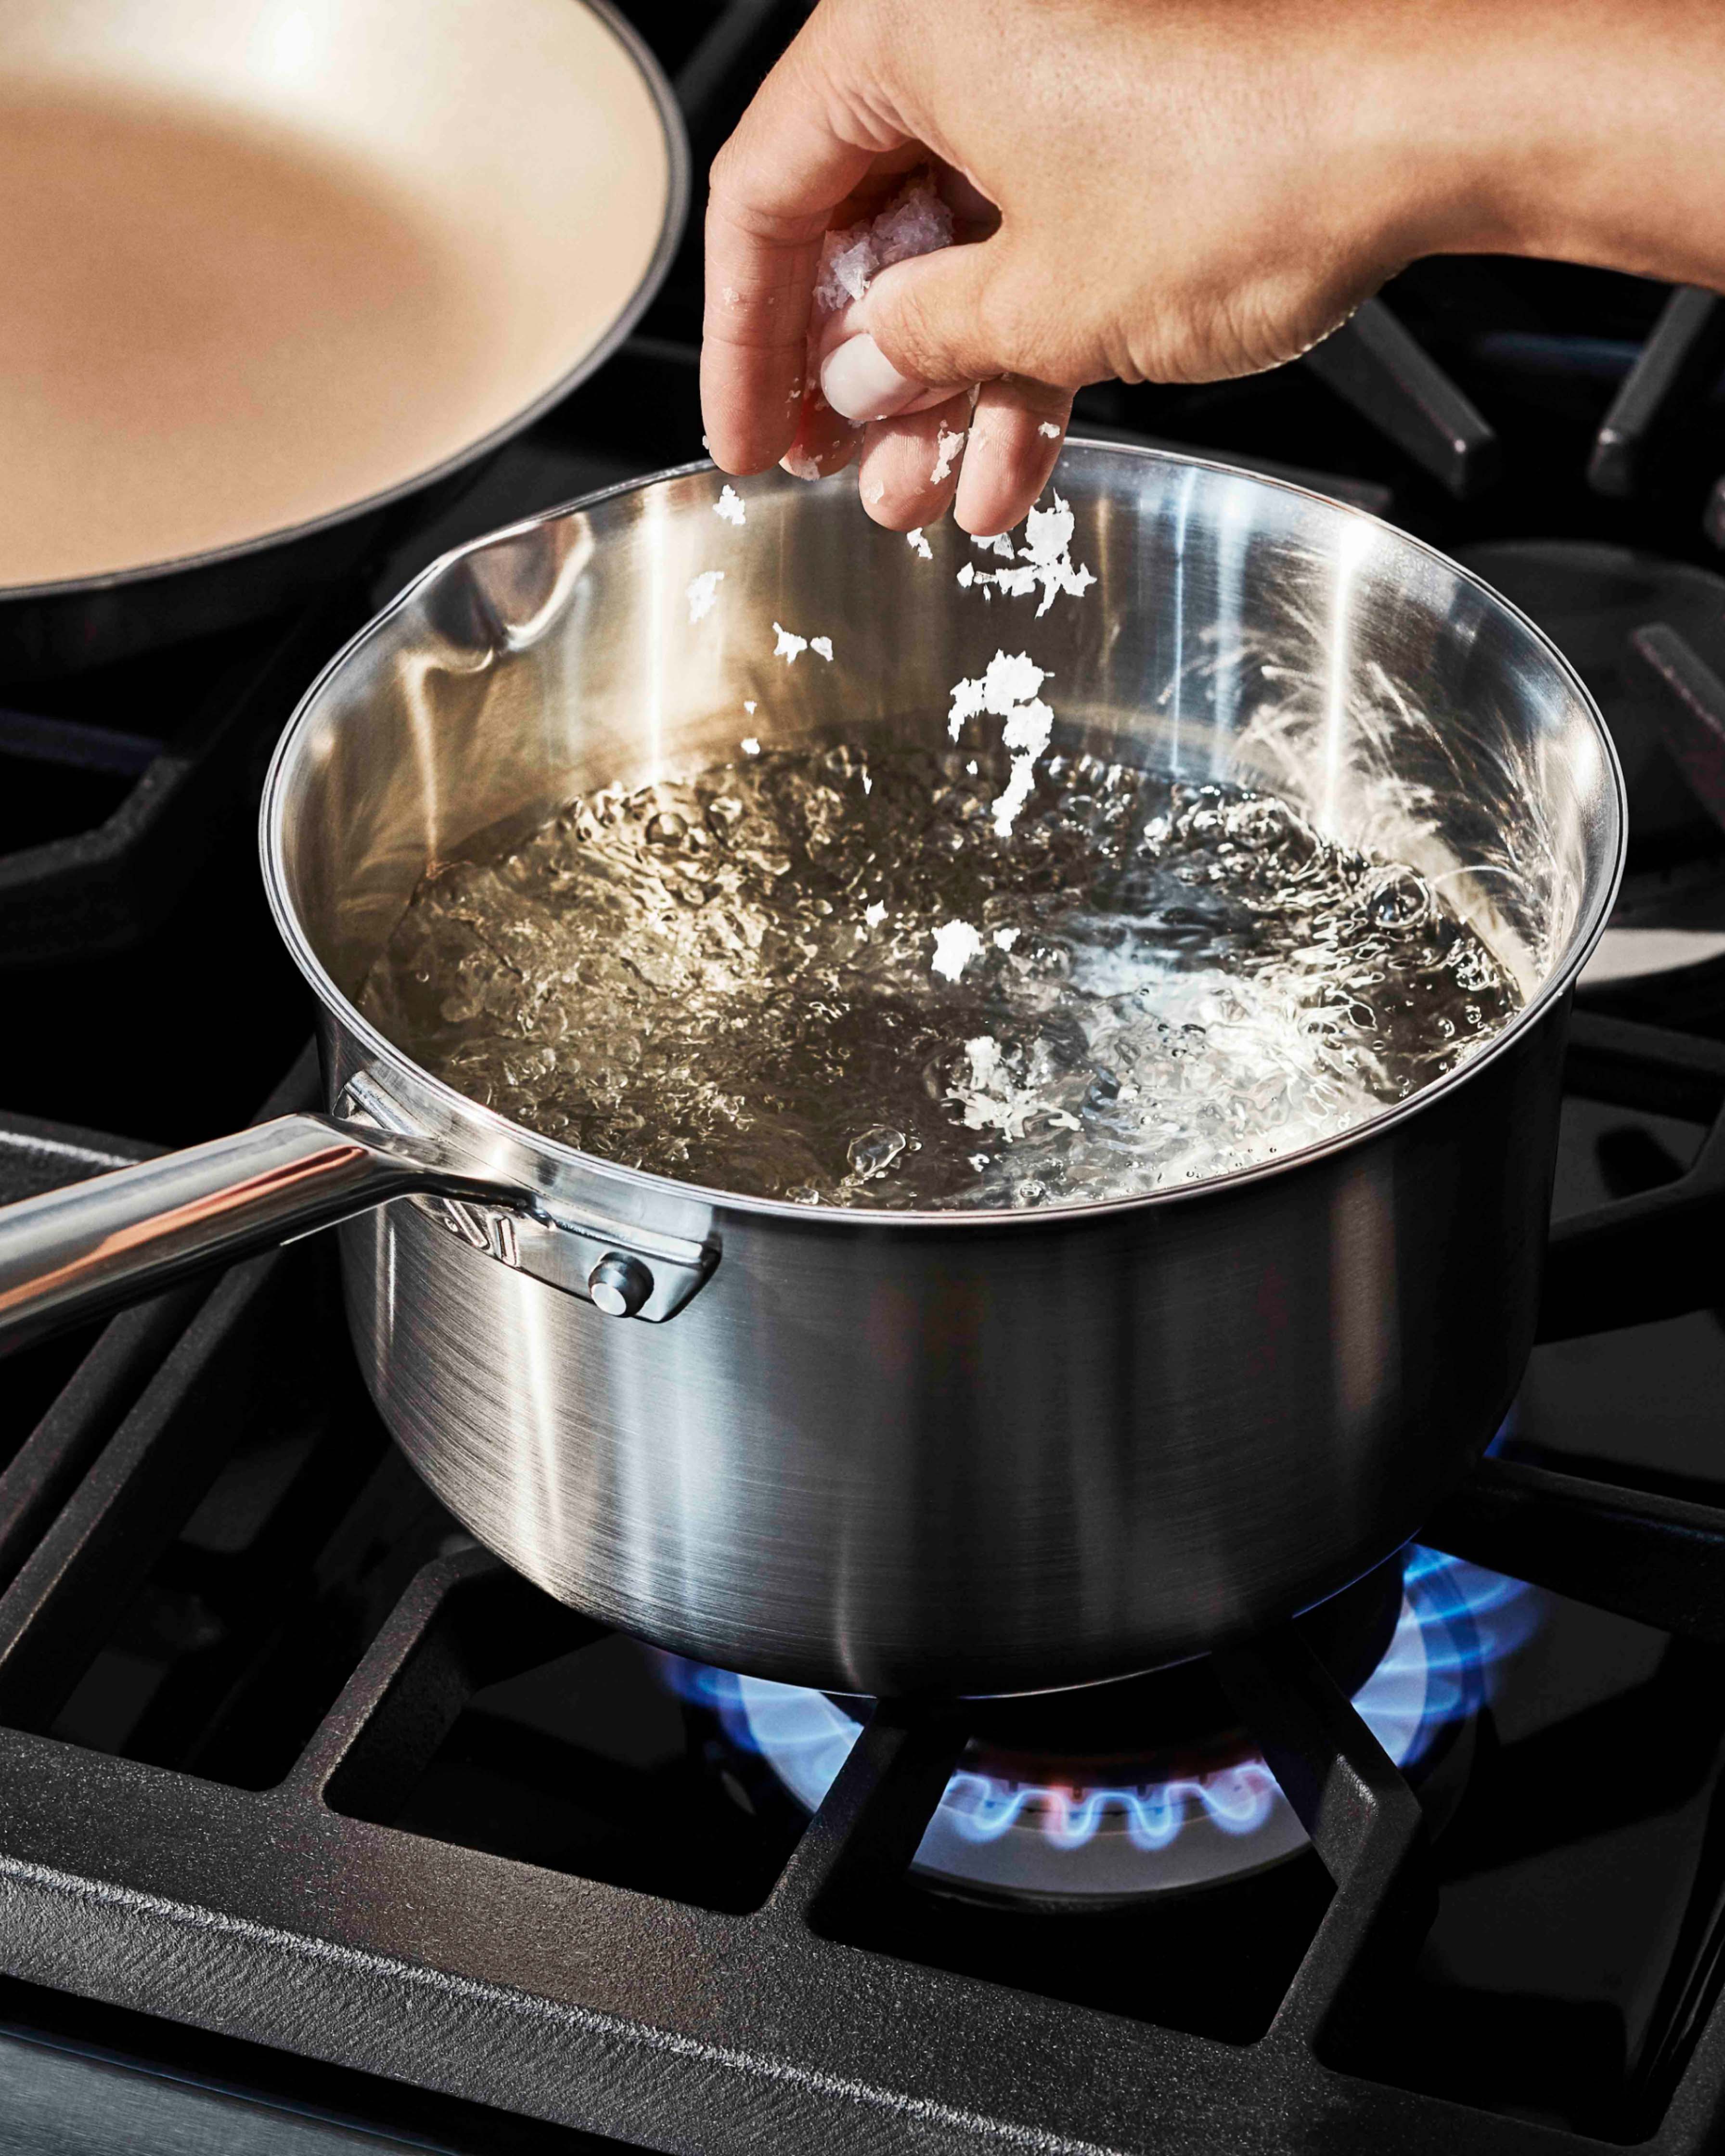 Pot Boiling Water On Image & Photo (Free Trial)